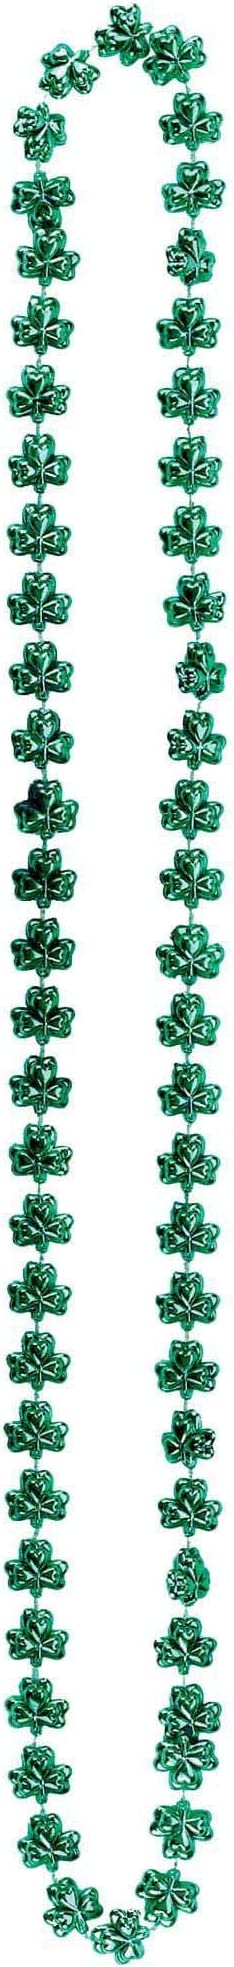 St Patricks Day Beads Necklace Bulk (72 Pack) Shamrock Green Beads - St. Patrick's Day Gifts for Kids, 33" 7mm Kids Party Favor Supplies Costume Accessories by By 4E’s Novelty